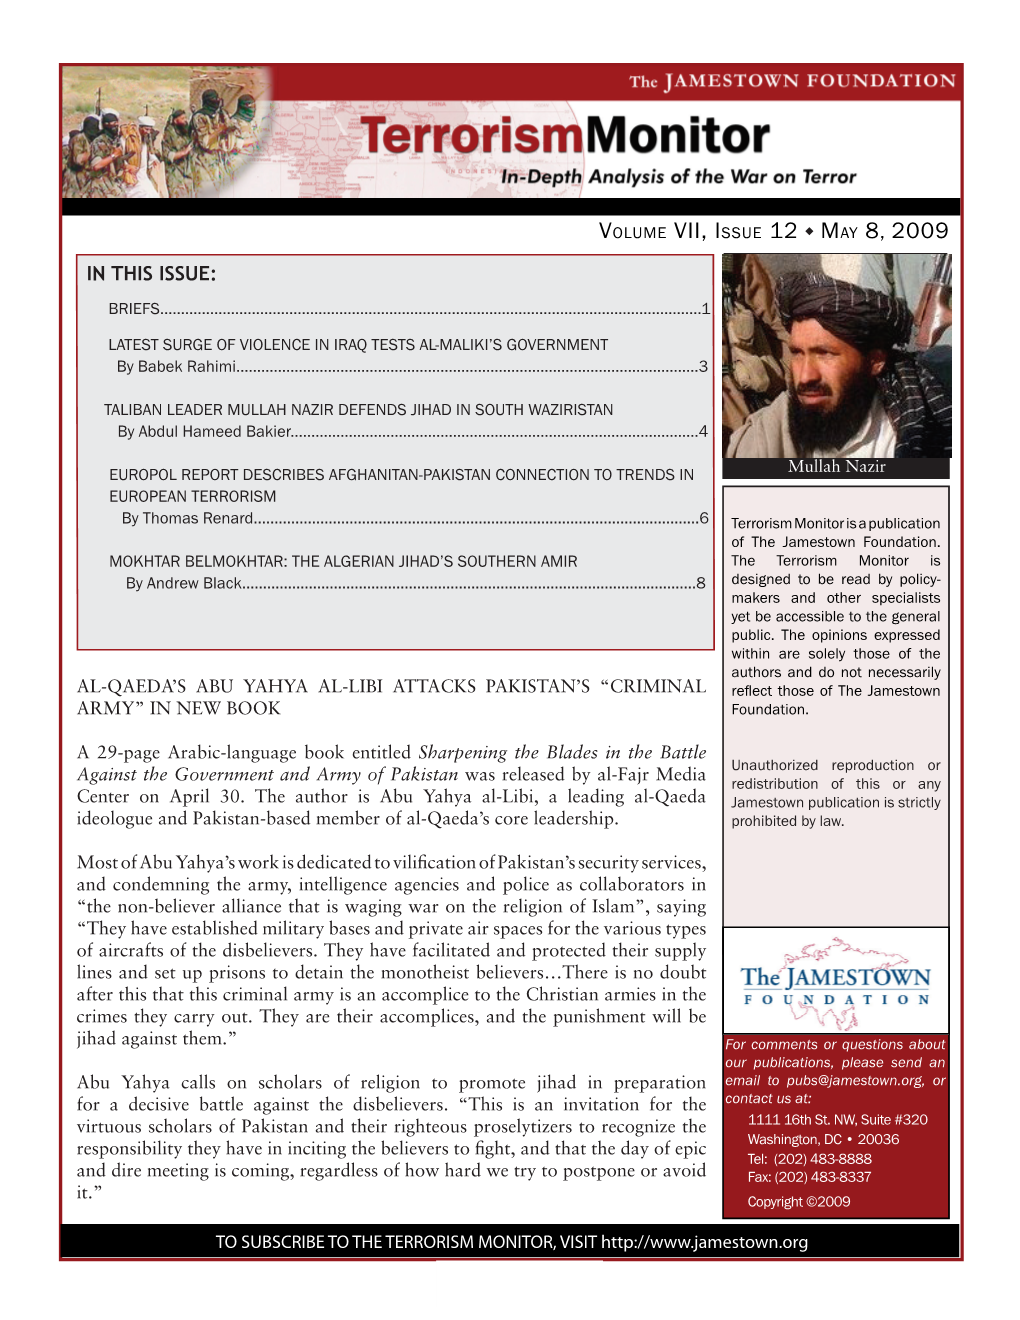 MOKHTAR BELMOKHTAR: the ALGERIAN JIHAD’S SOUTHERN AMIR the Terrorism Monitor Is by Andrew Black